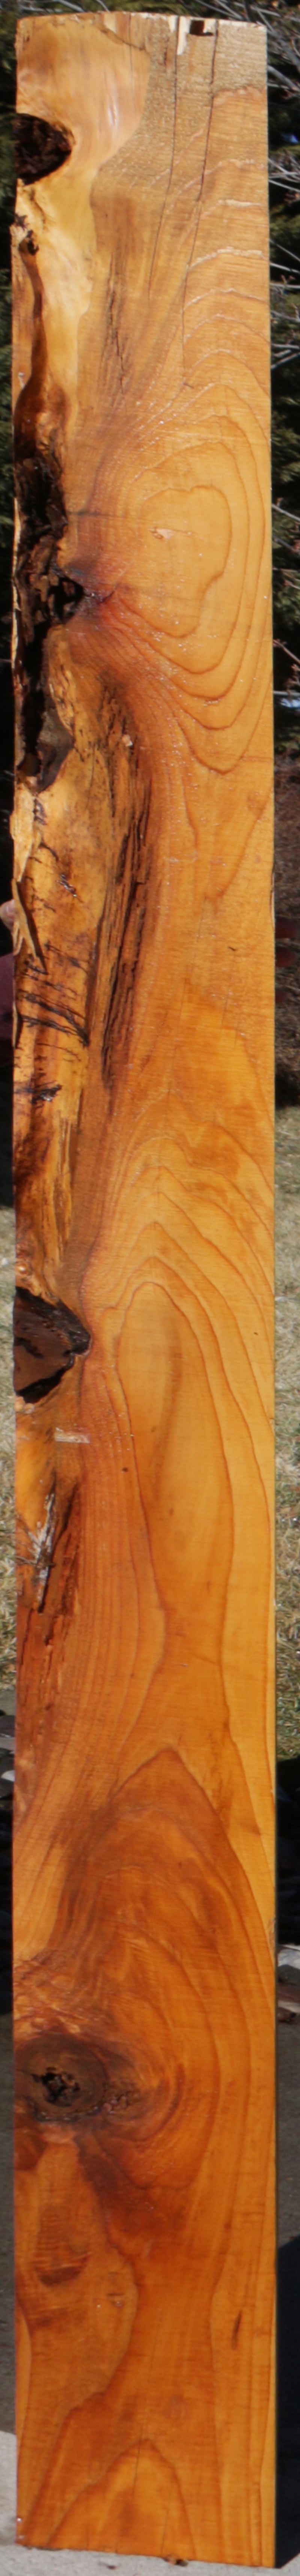 Rustic Red Cedar Live Edge Mantel (Ships Freight, Free Shipping Excluded)